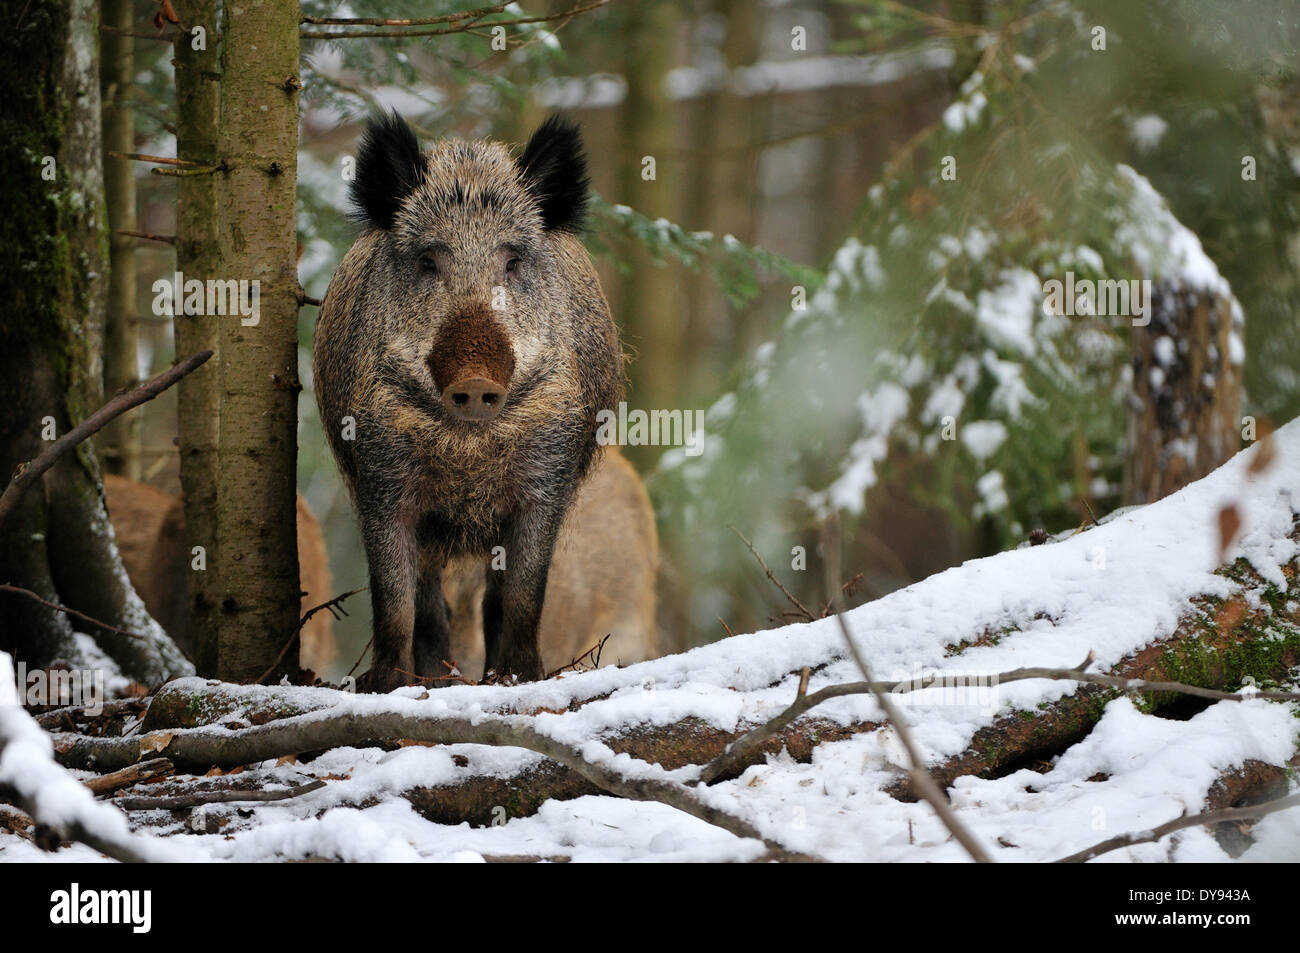 Wild boar Sus scrofa scrofa sow sows wild boars cloven-hoofed animal pigs pig vertebrates mammals winter snow cold winter an Stock Photo